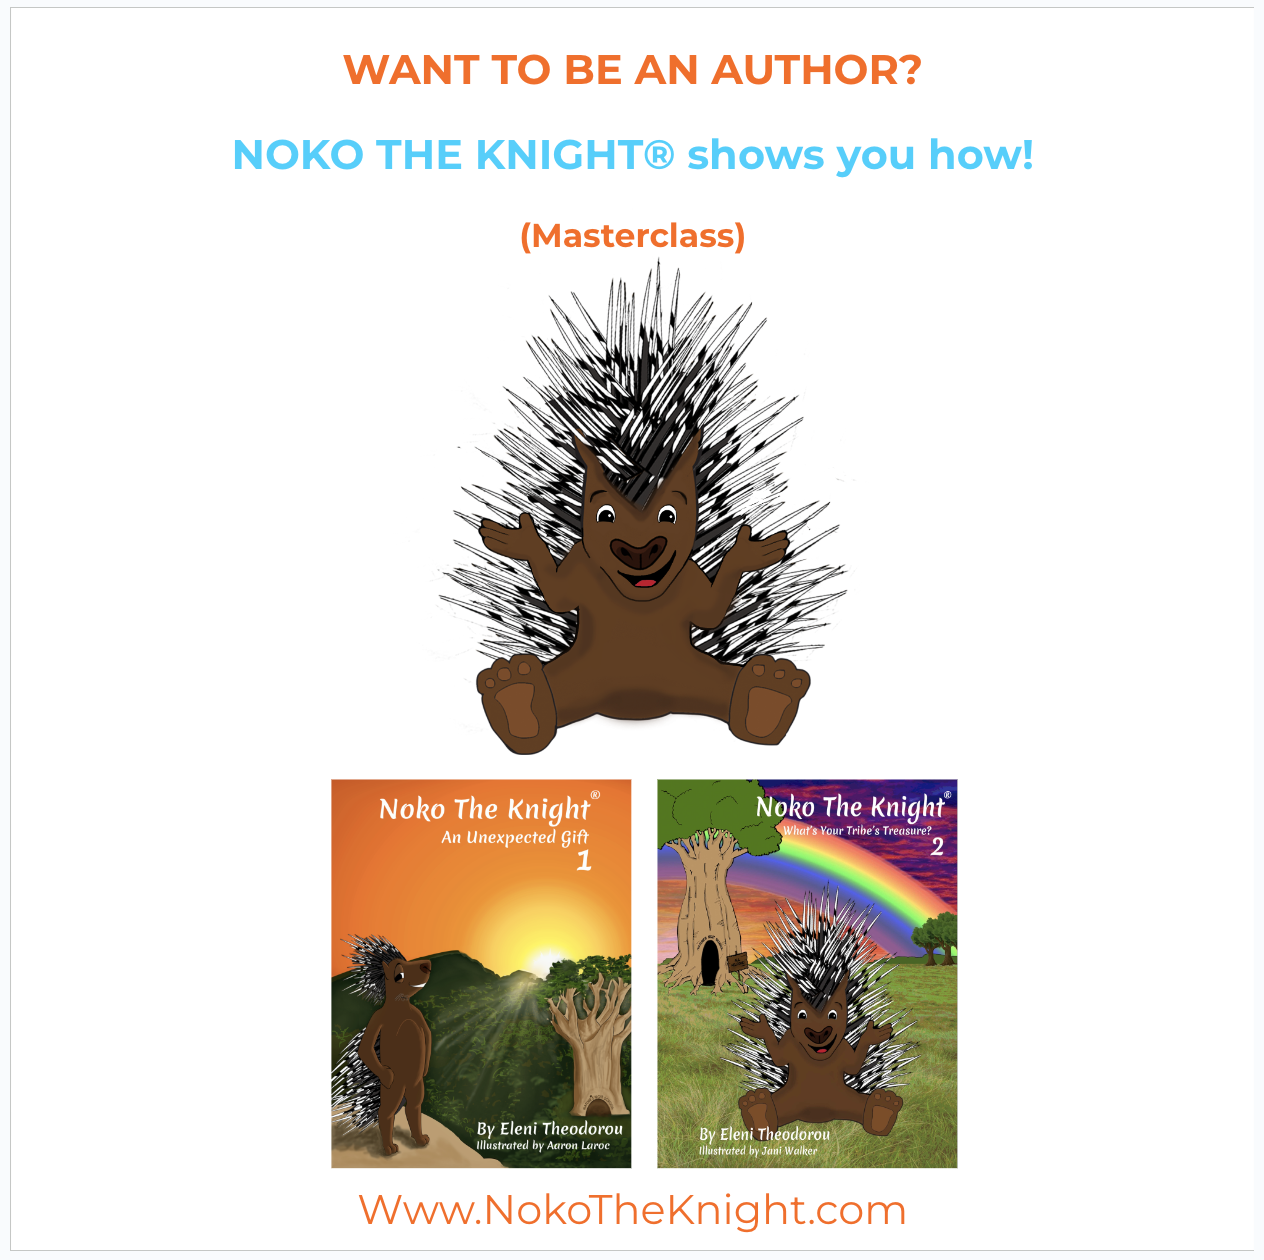 Want to be an author? ENGLISH www.nokotheknight.com